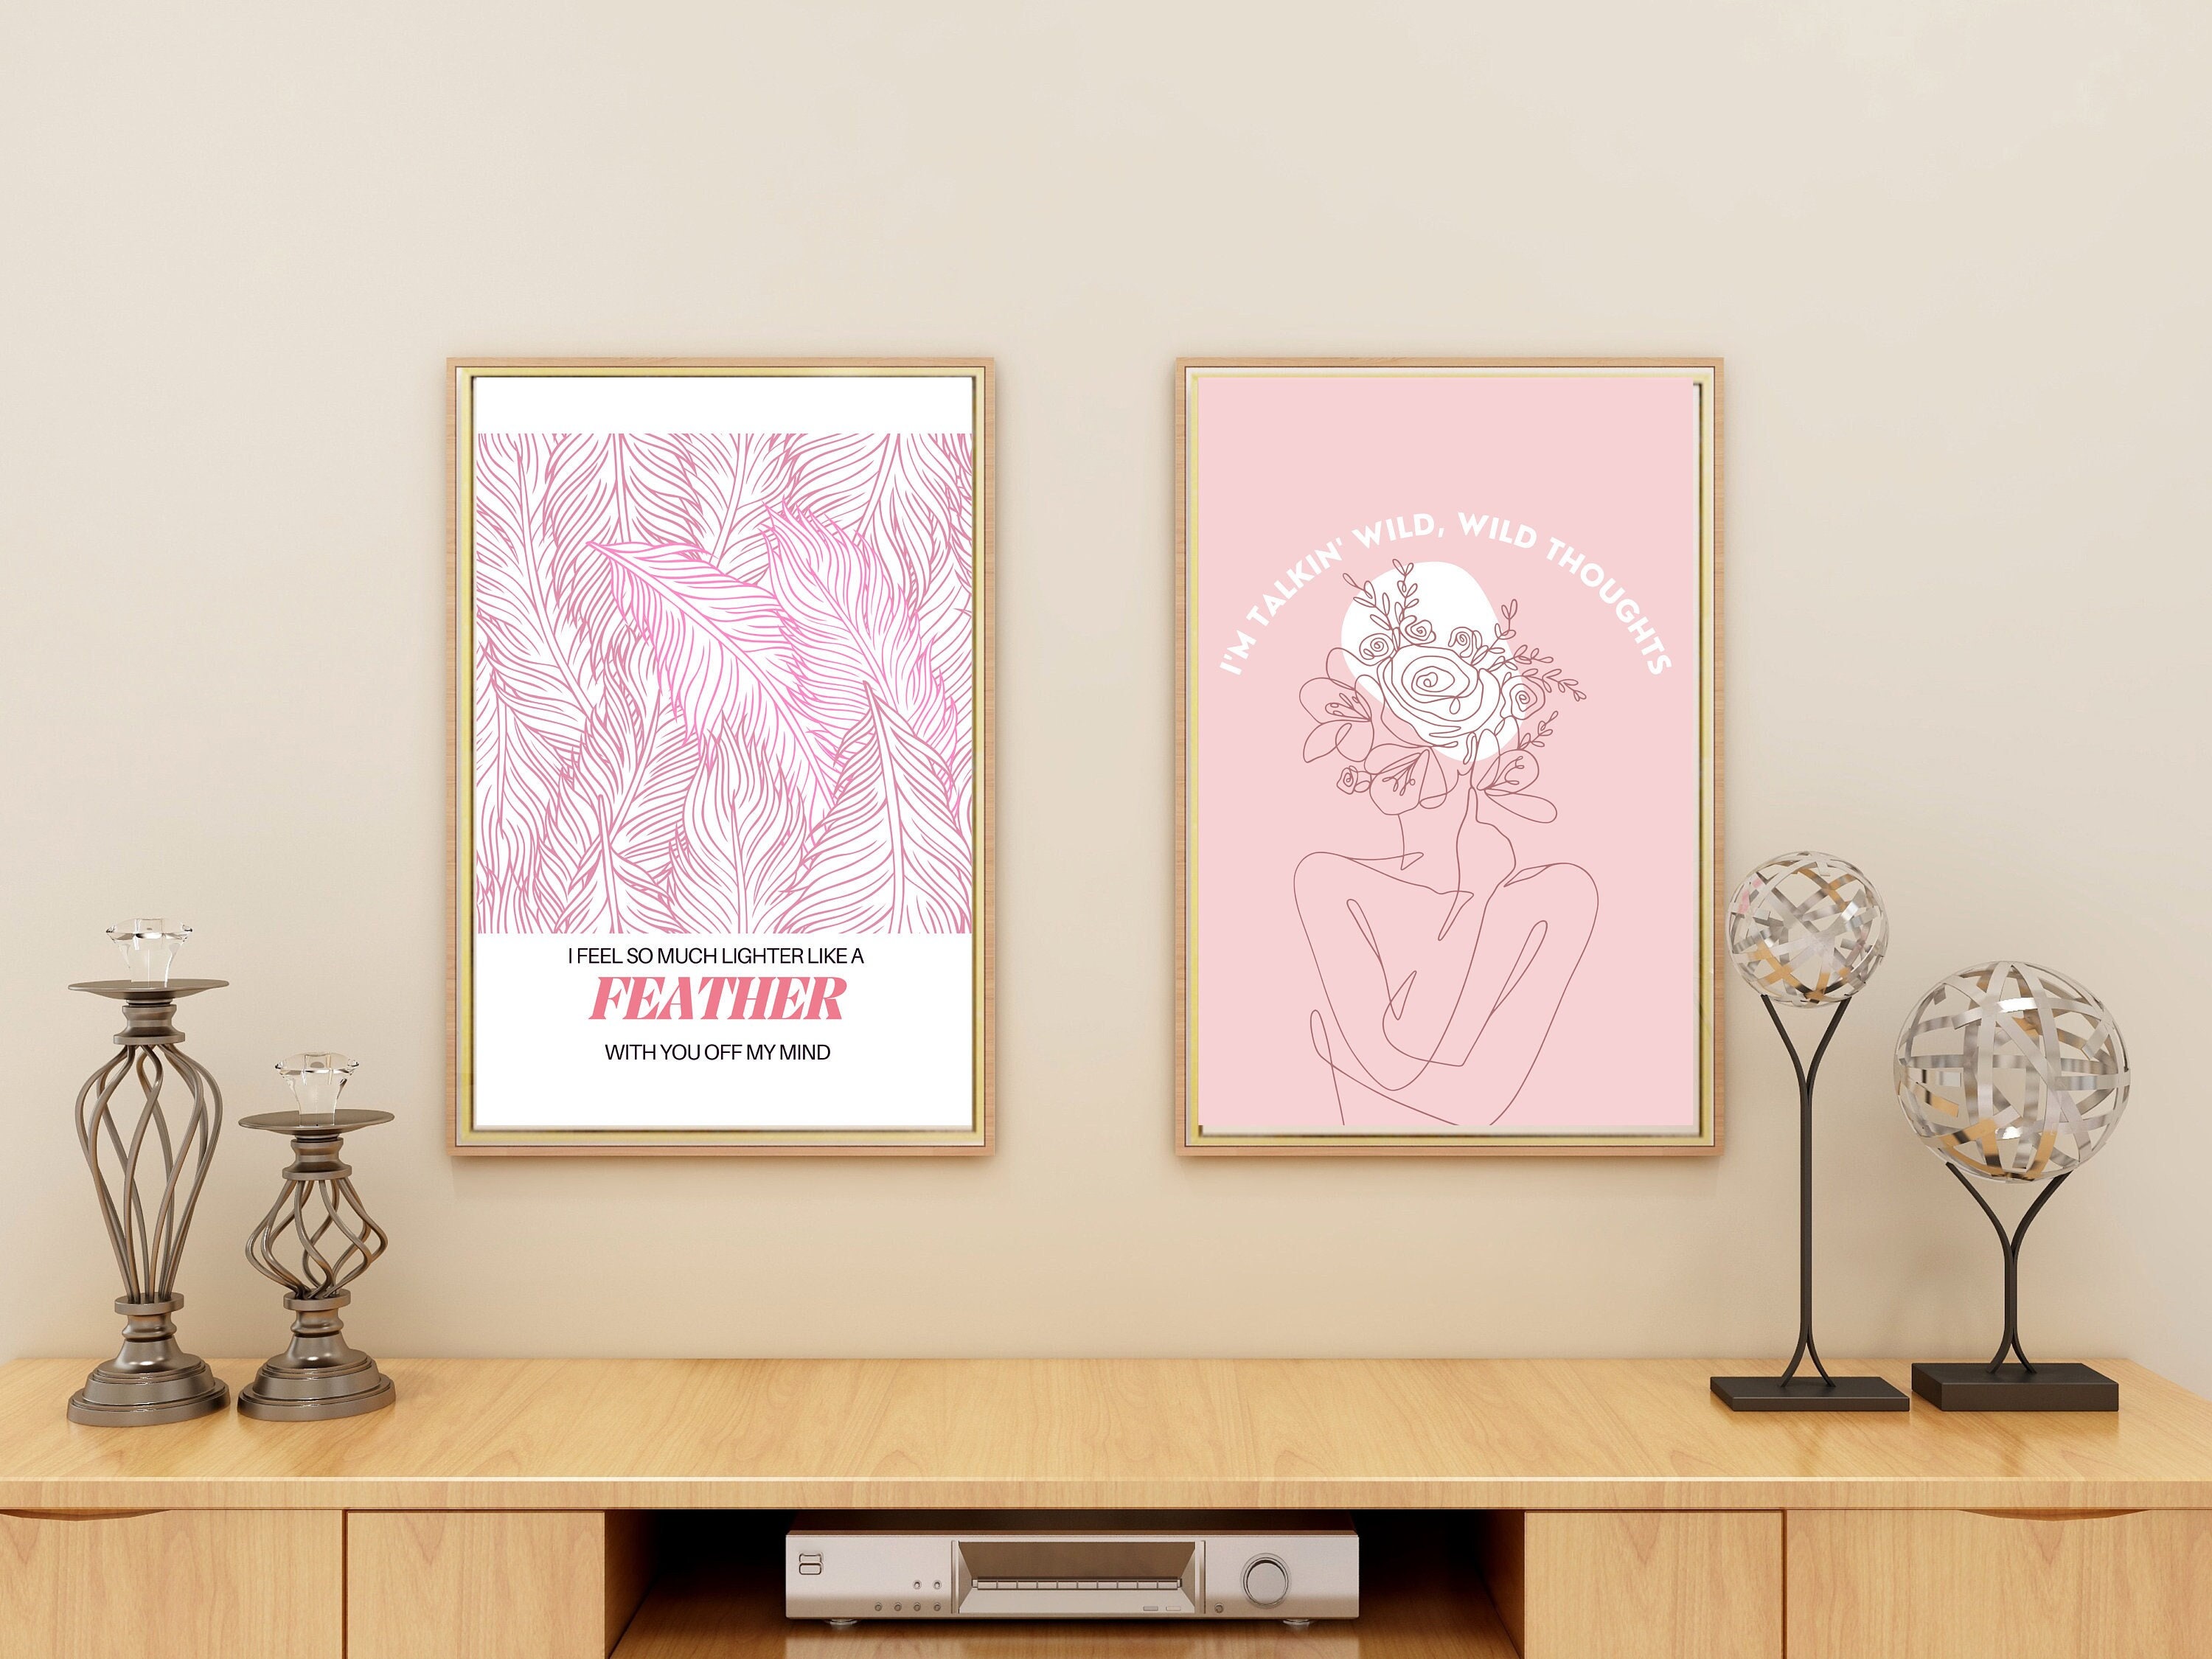 Sabrina Carpenter Feather Gifts & Merchandise for Sale